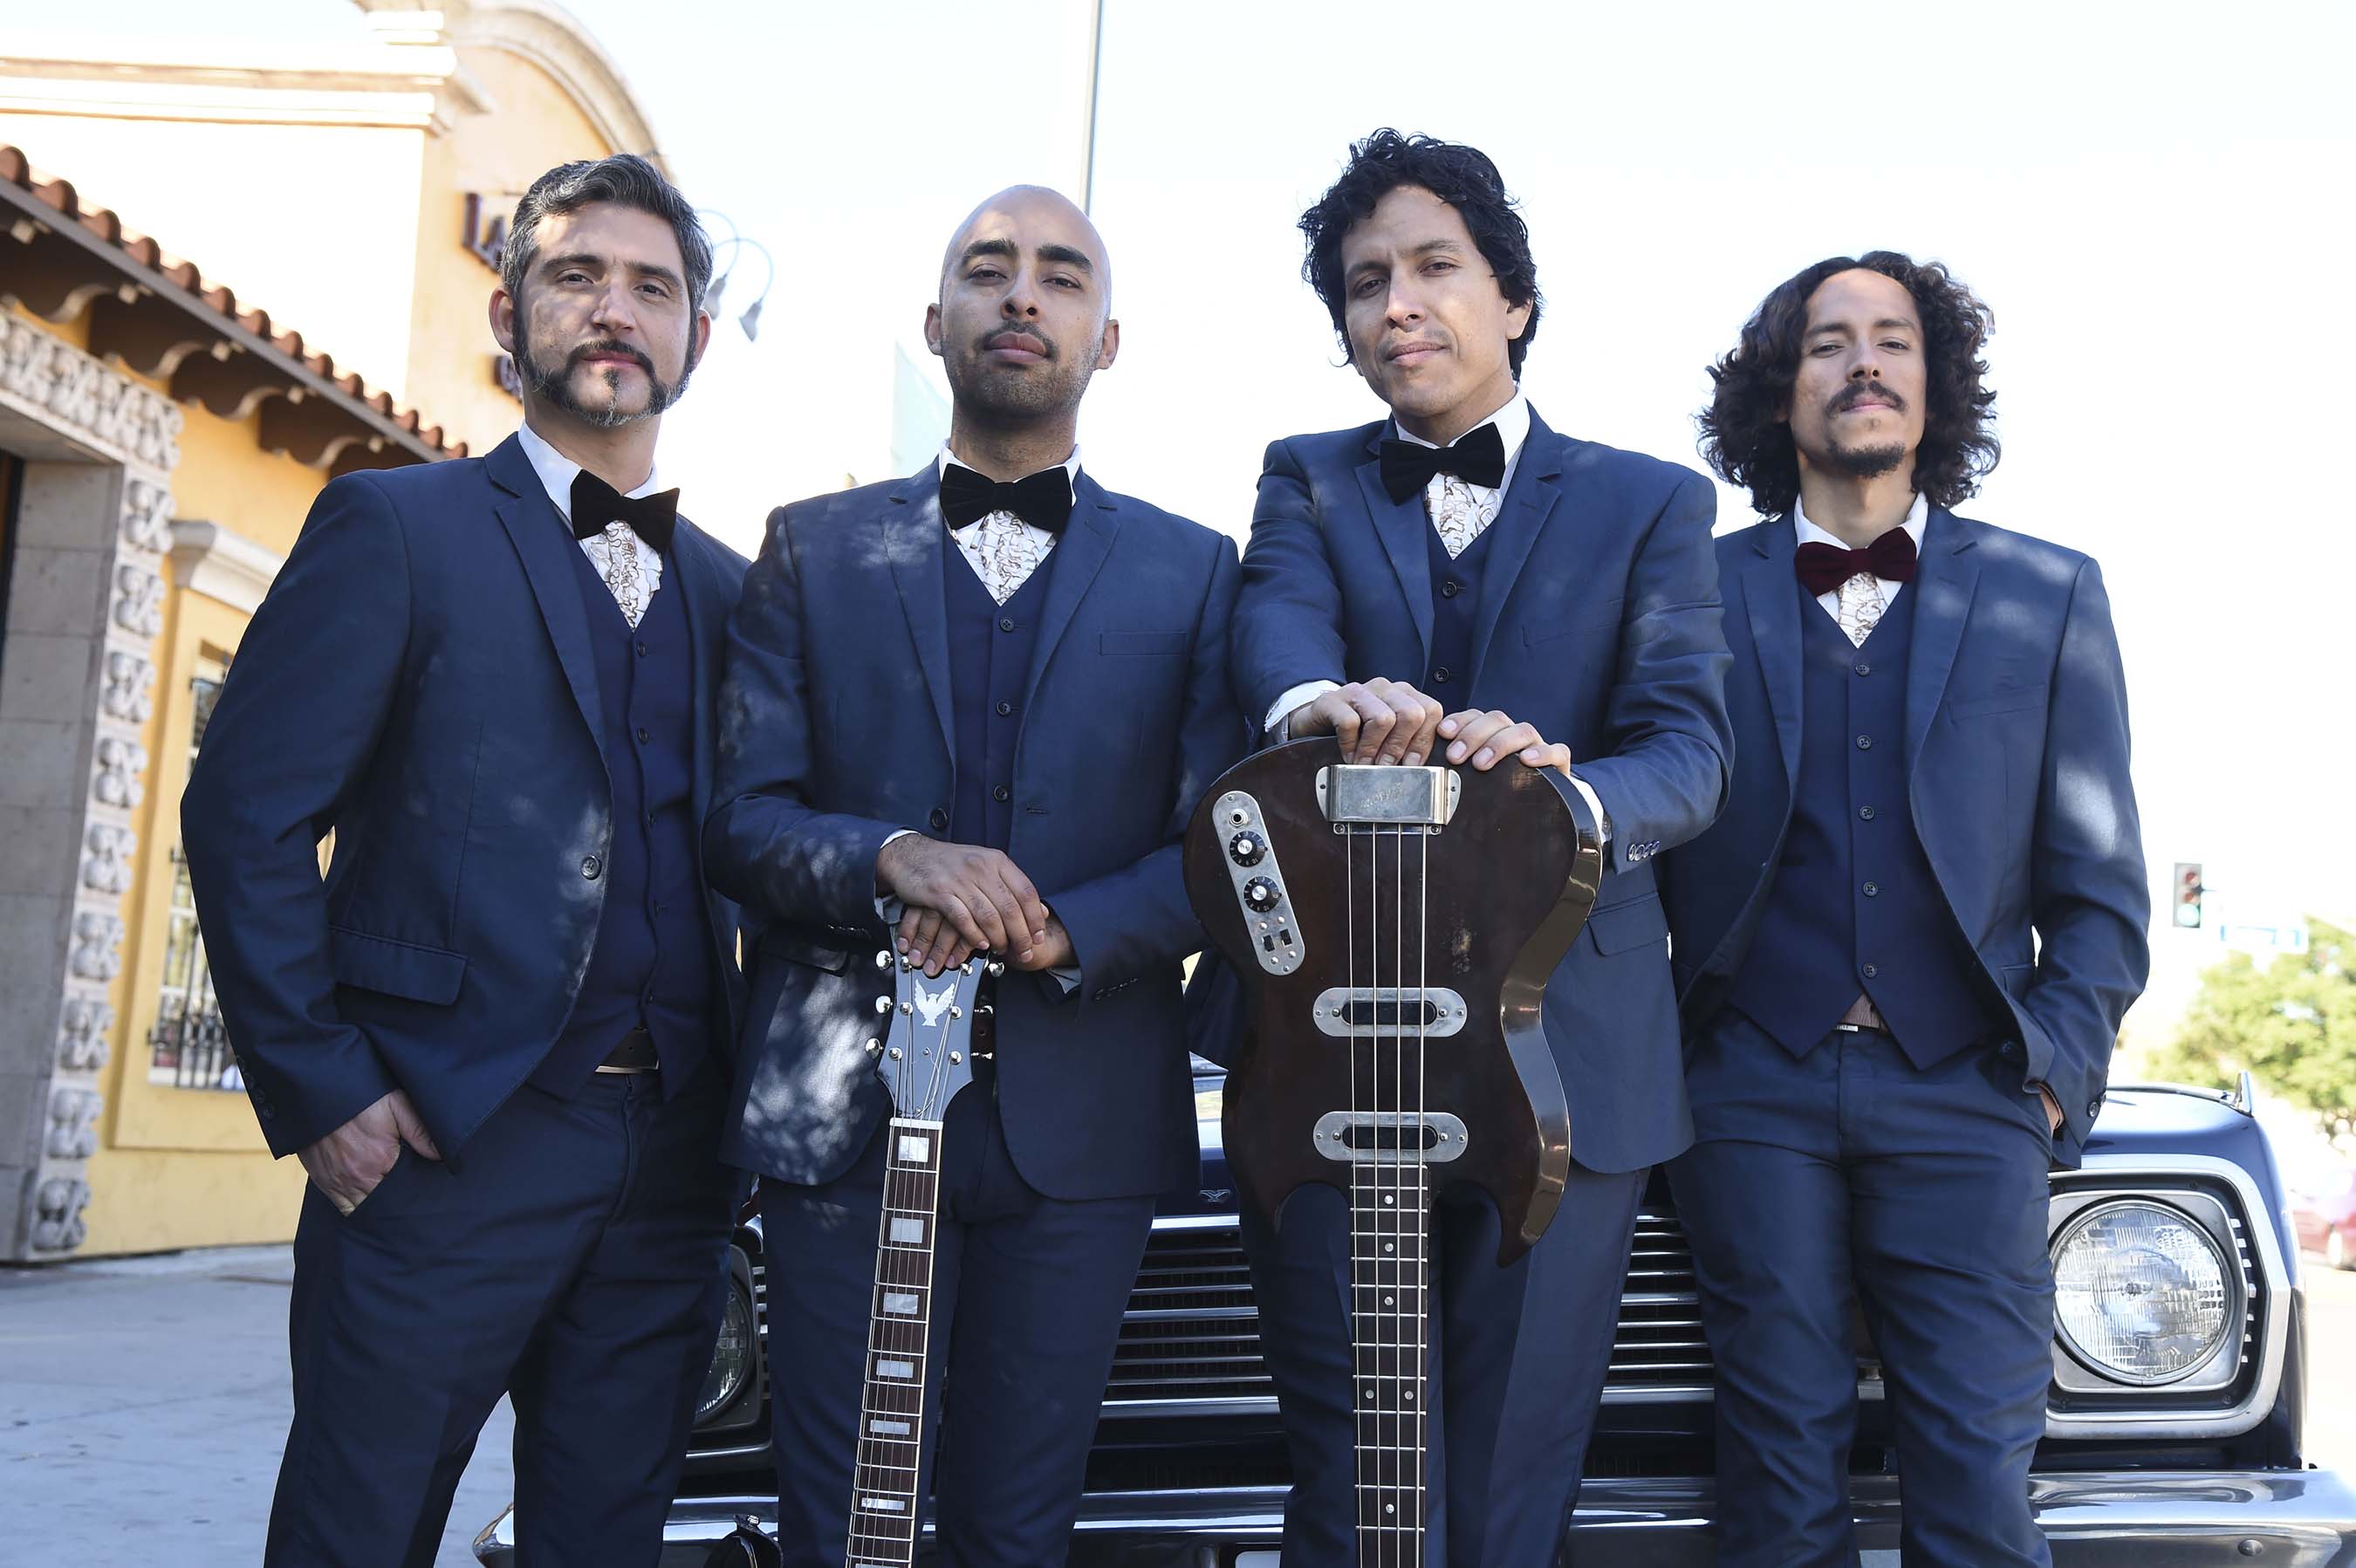 LA-based soul band, Chicano Batman, reinterprets the iconic American anthem, ‘This Land Is Your Land,’ in support of Johnnie Walker’s new Keep Walking America campaign (Michael Kovac/Getty Images).